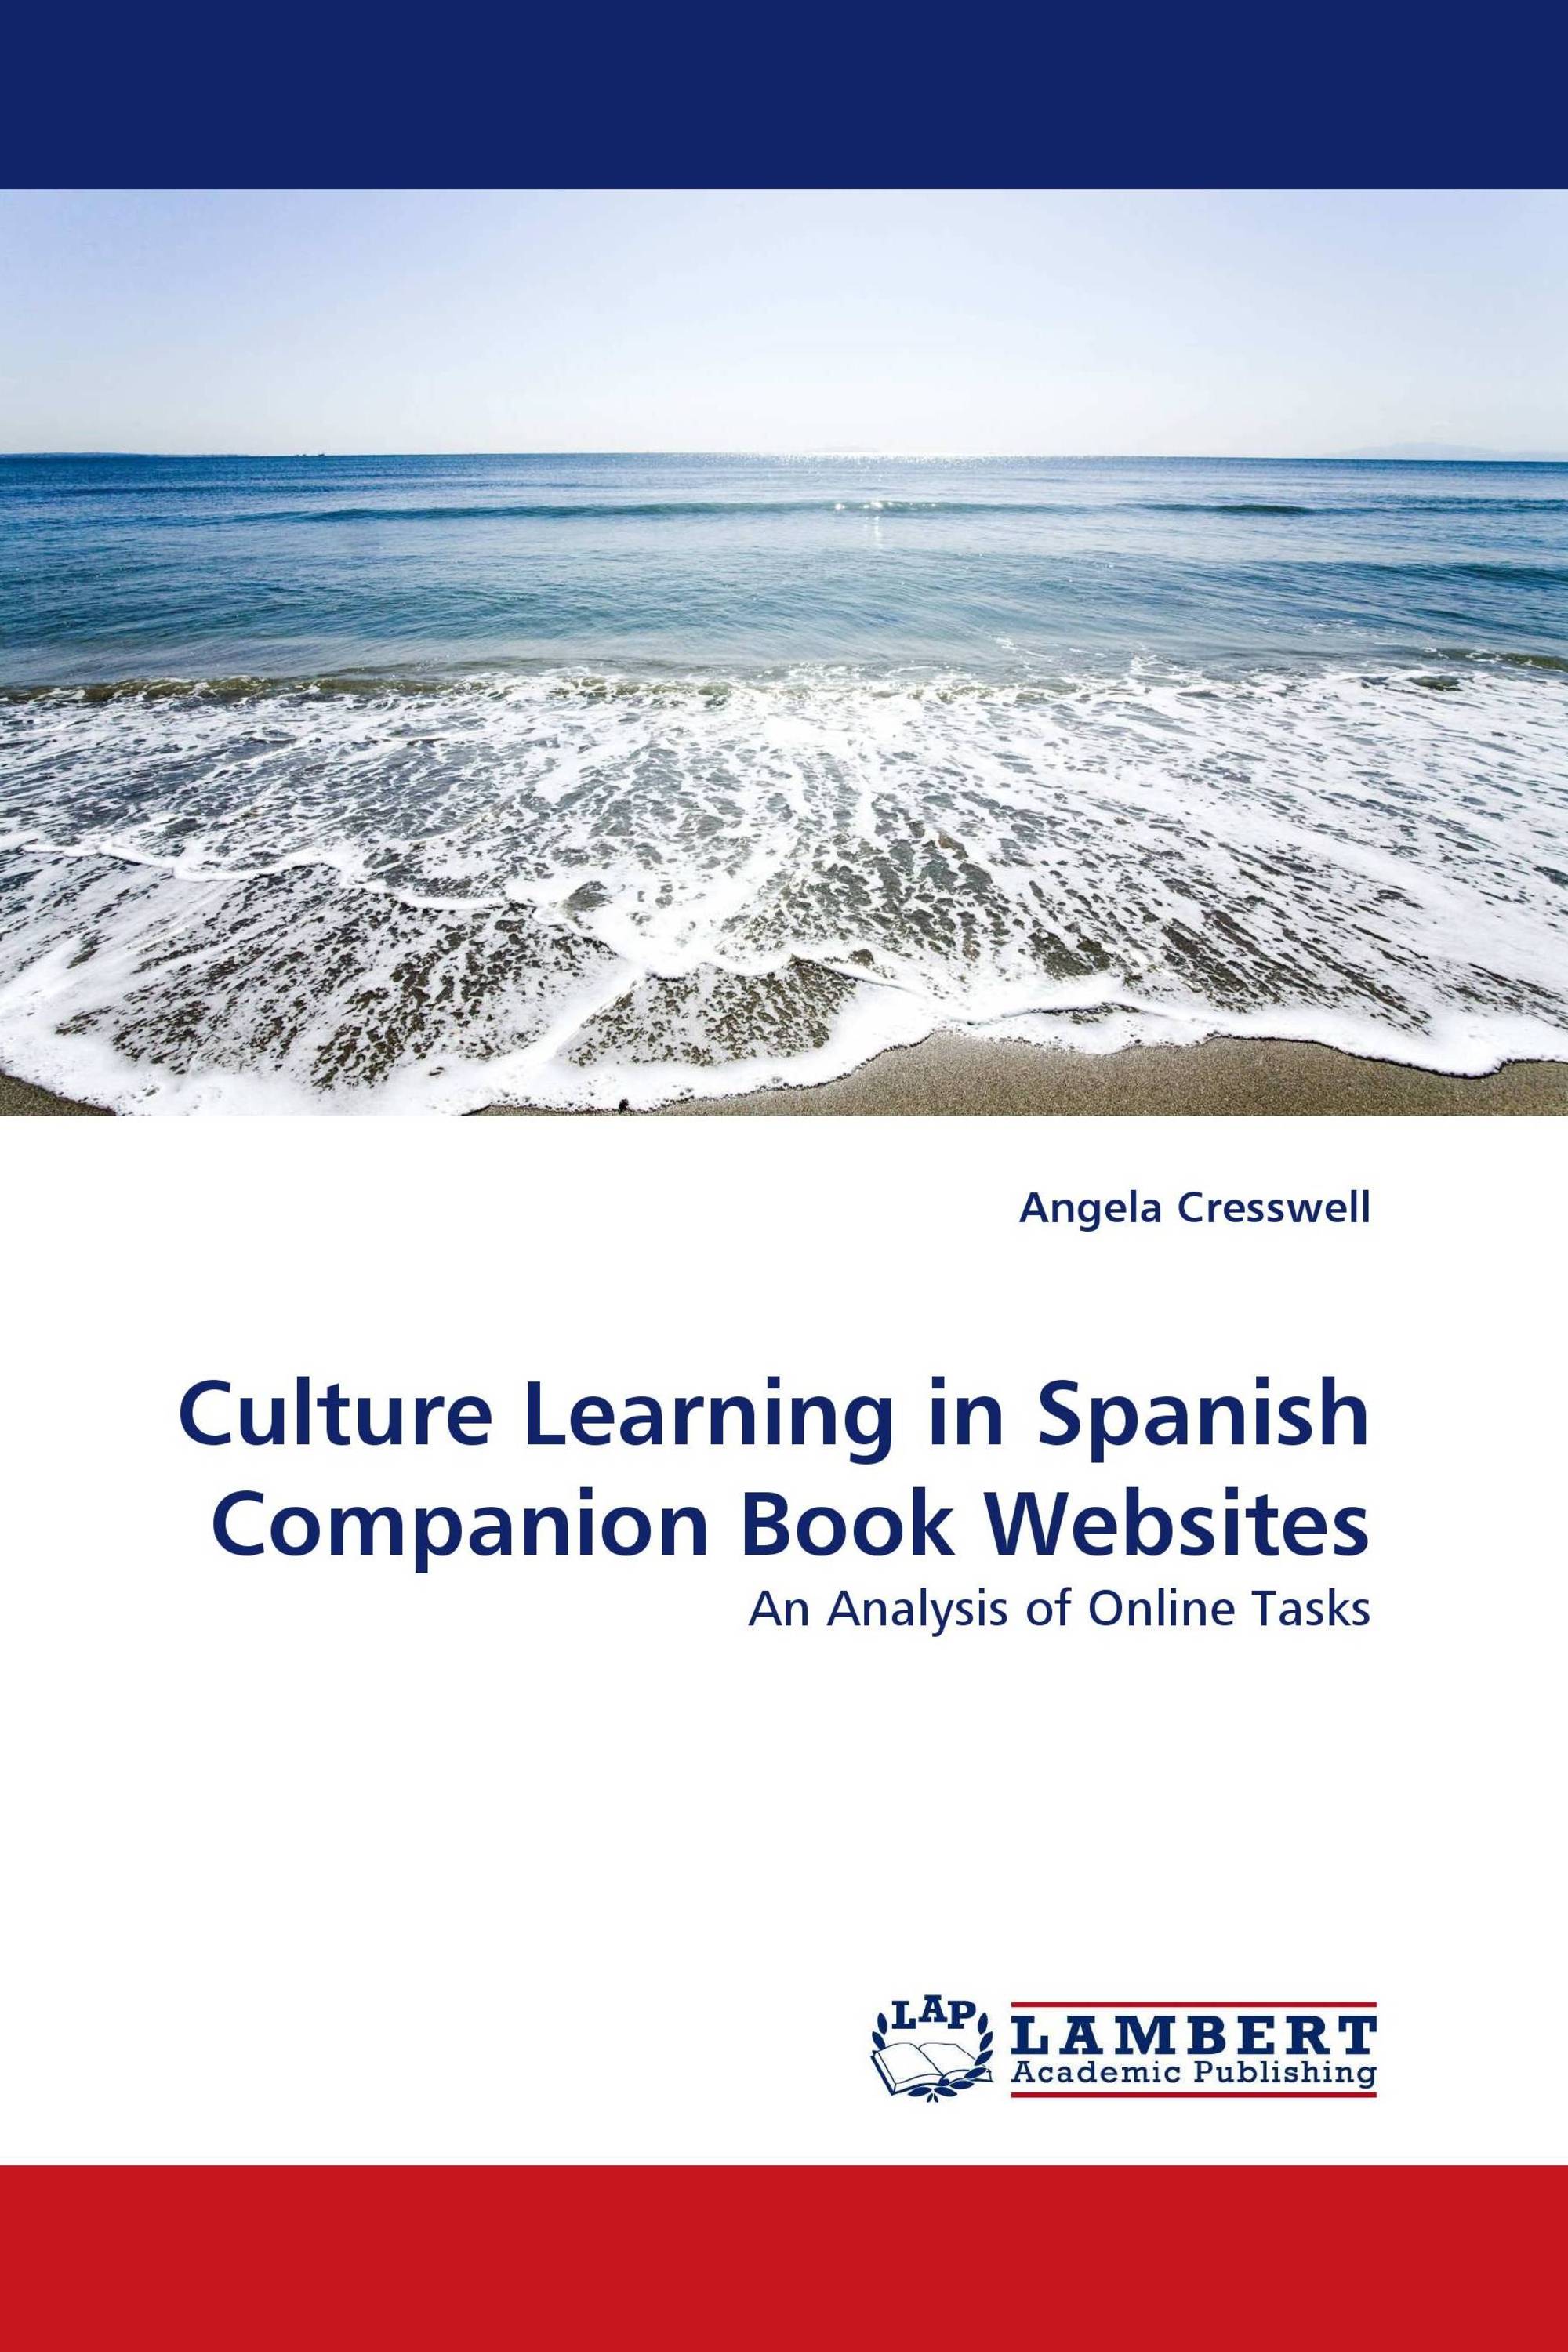 Culture Learning in Spanish Companion Book Websites